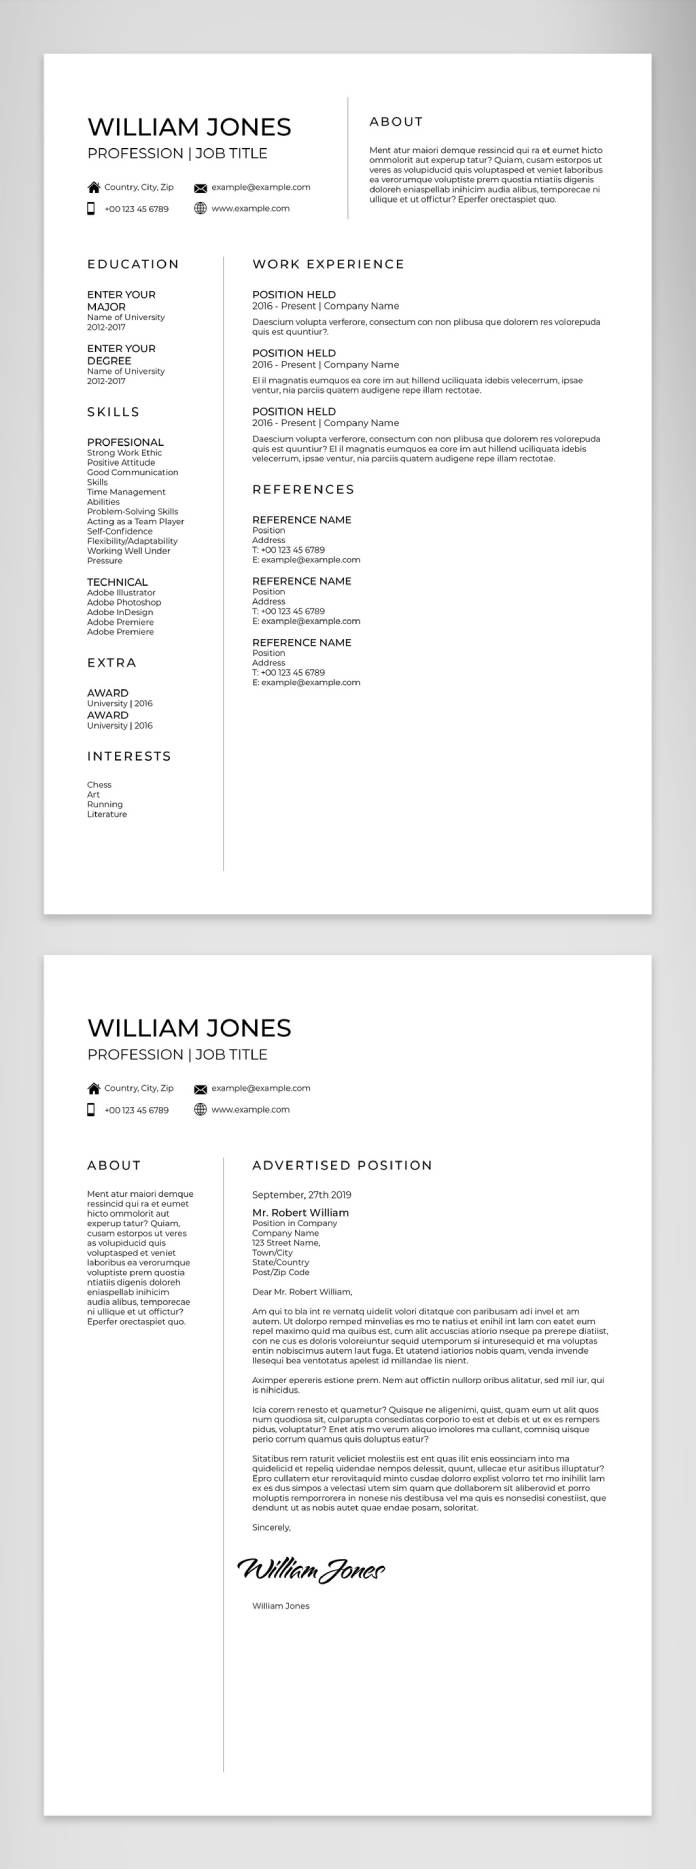 Job Application Resume and Cover Letter Template for Adobe InDesign by McLittle Stock